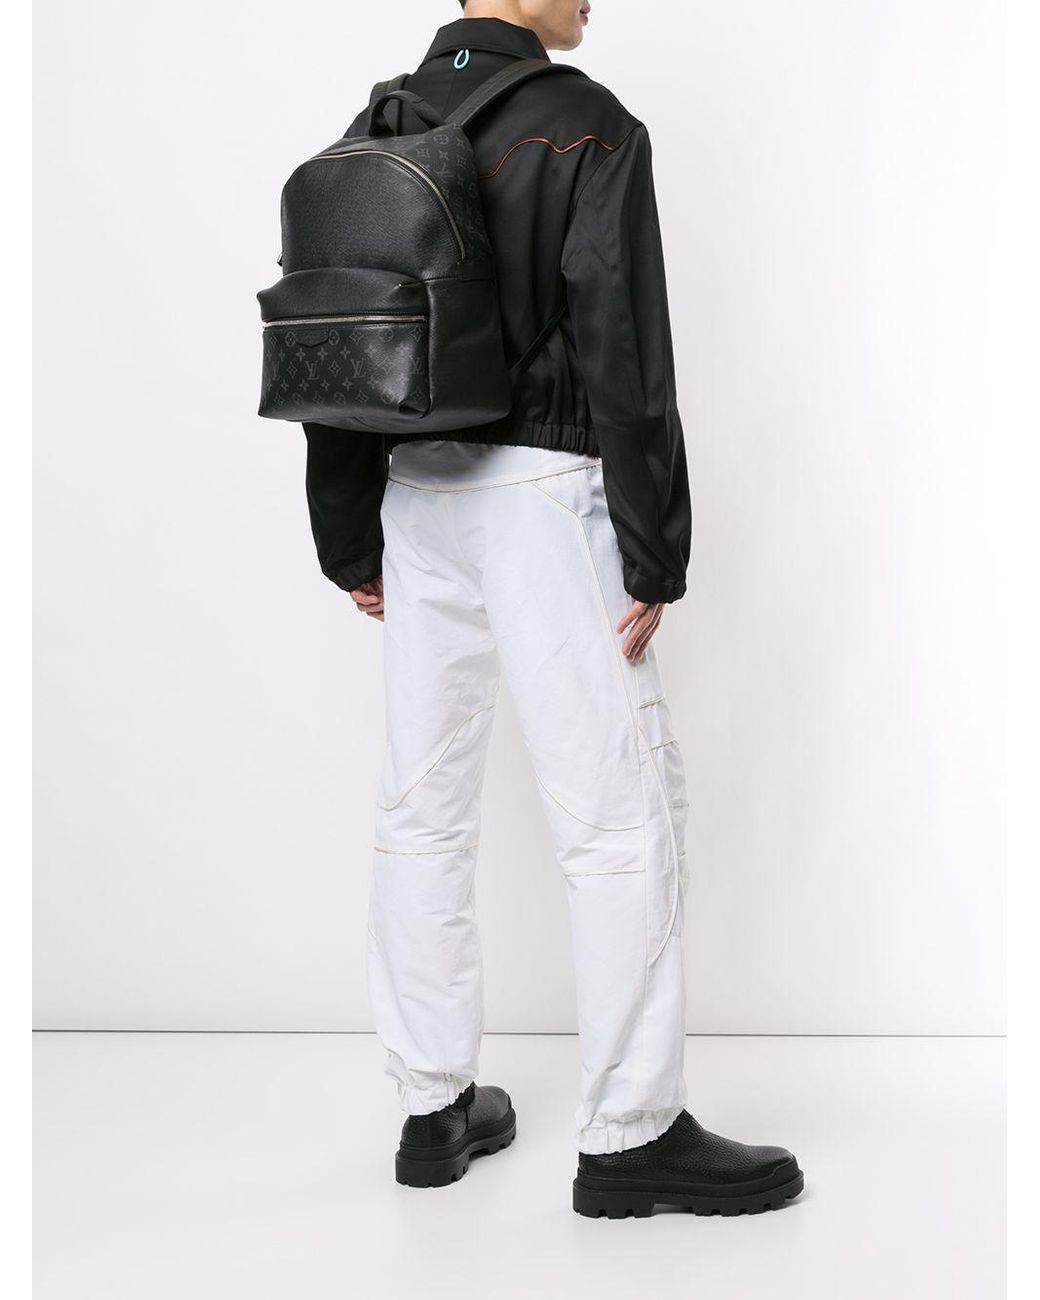 Louis Vuitton Men's Black 2019 Discovery Backpack